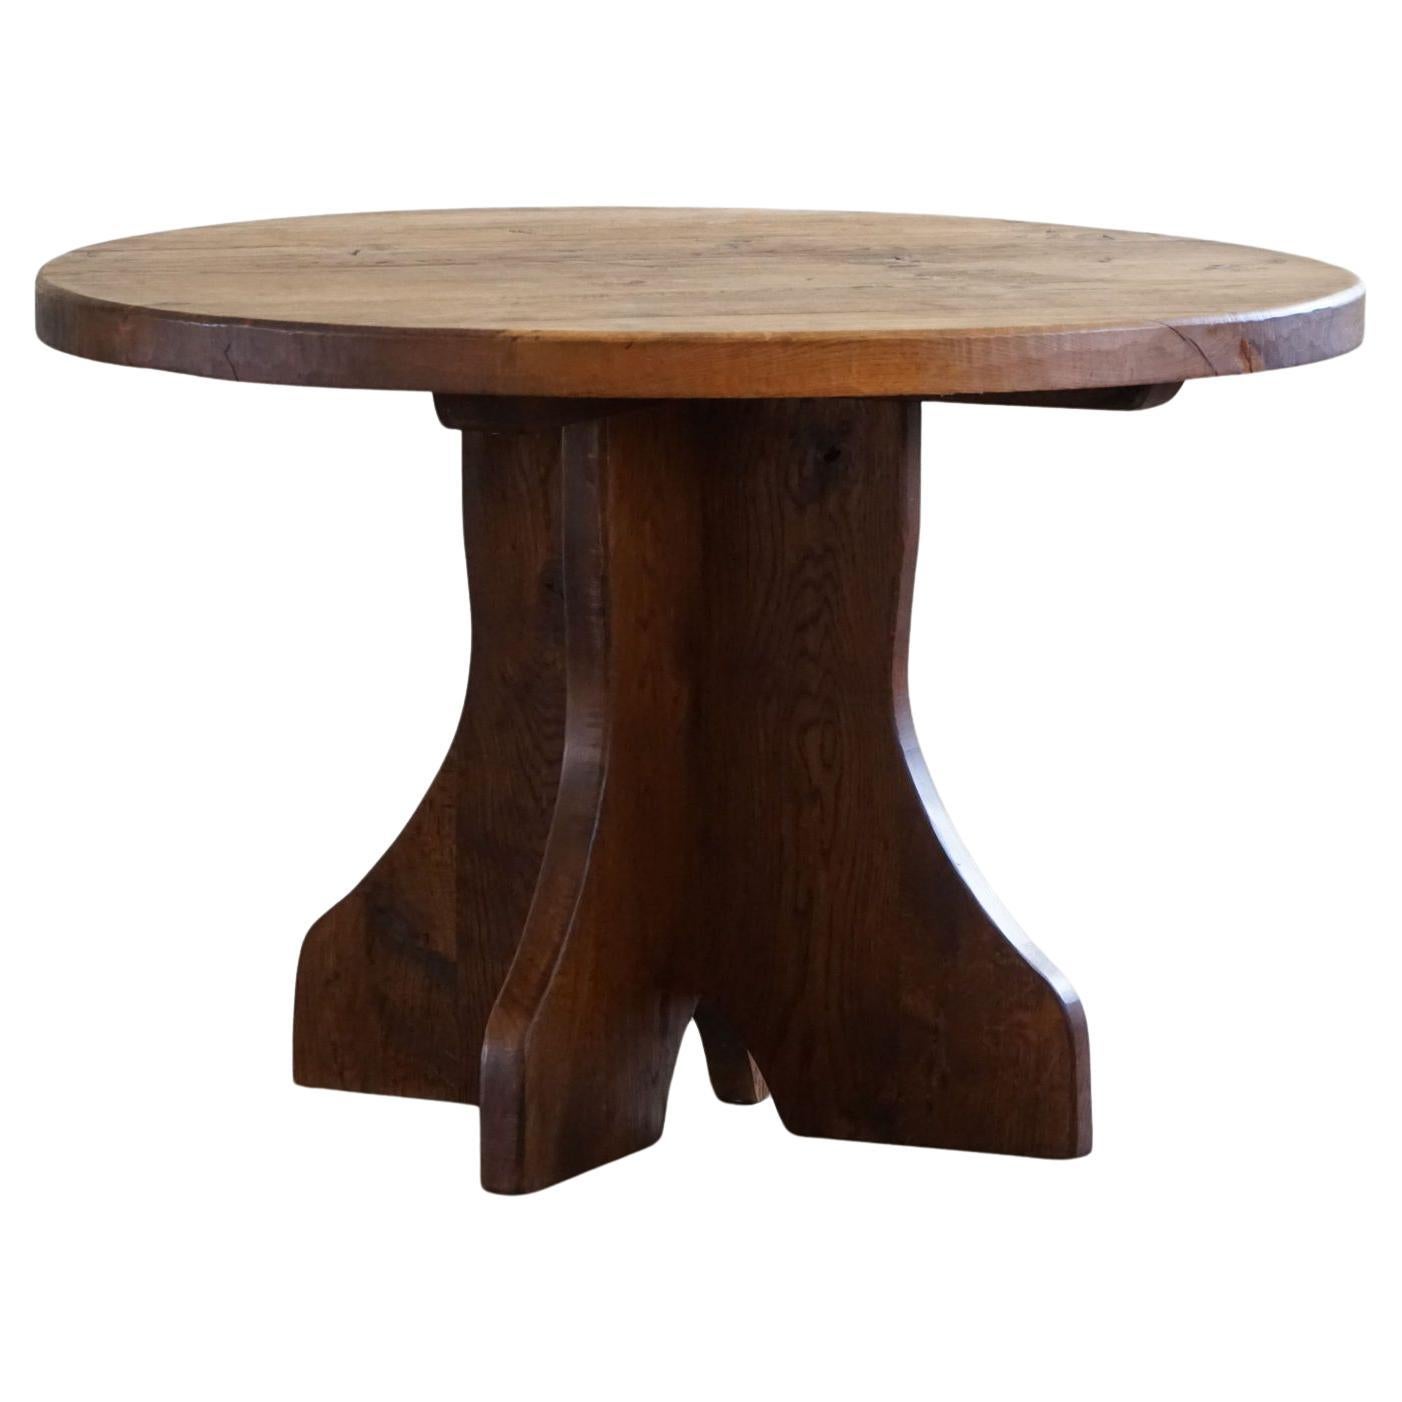 Round Brutalist Dining Table in Oak, Mid Century Modern, Made in France, 1960s